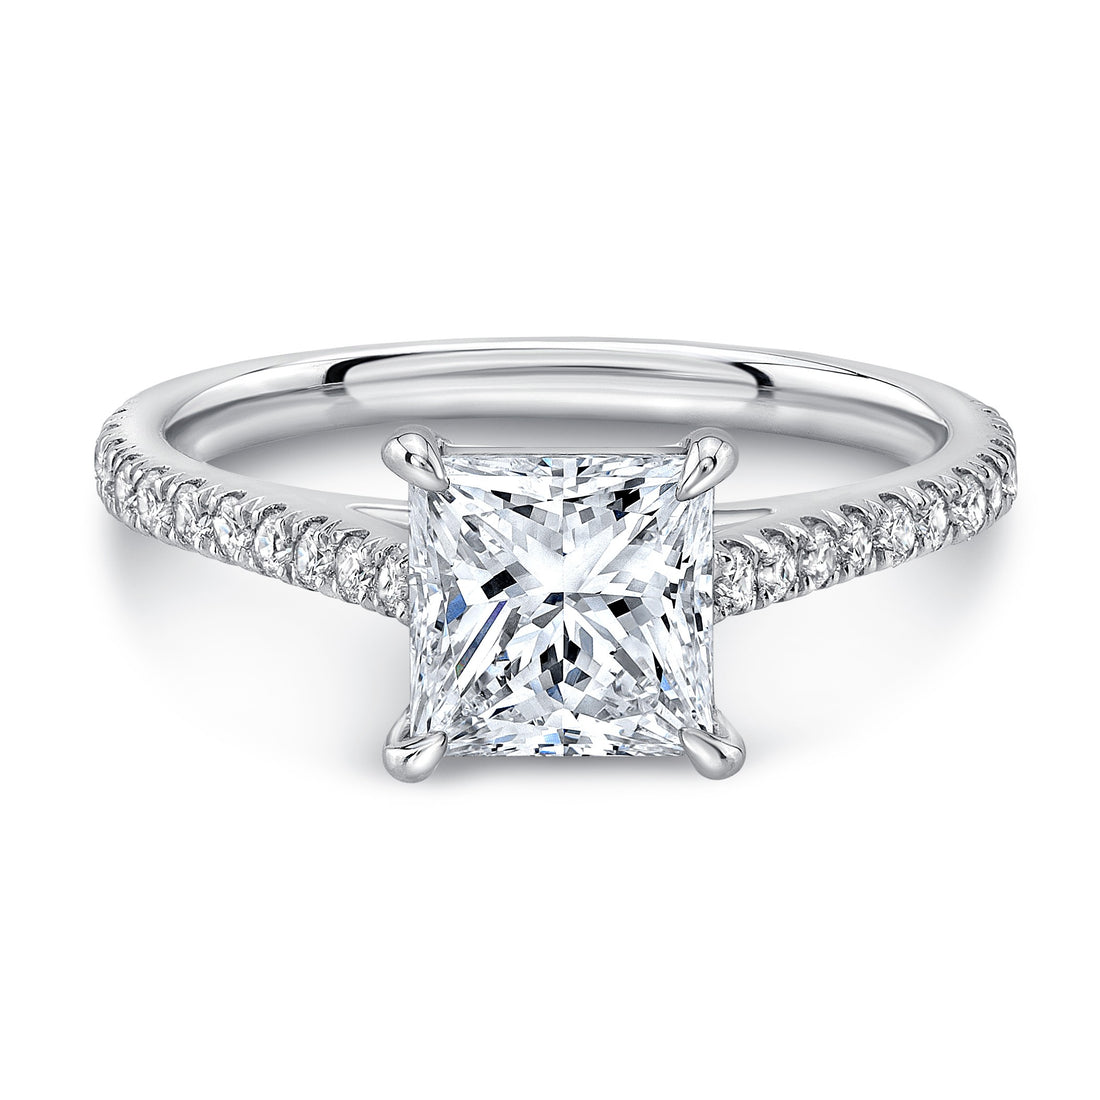 Extravagant Designs for Expensive Diamond Engagement Rings